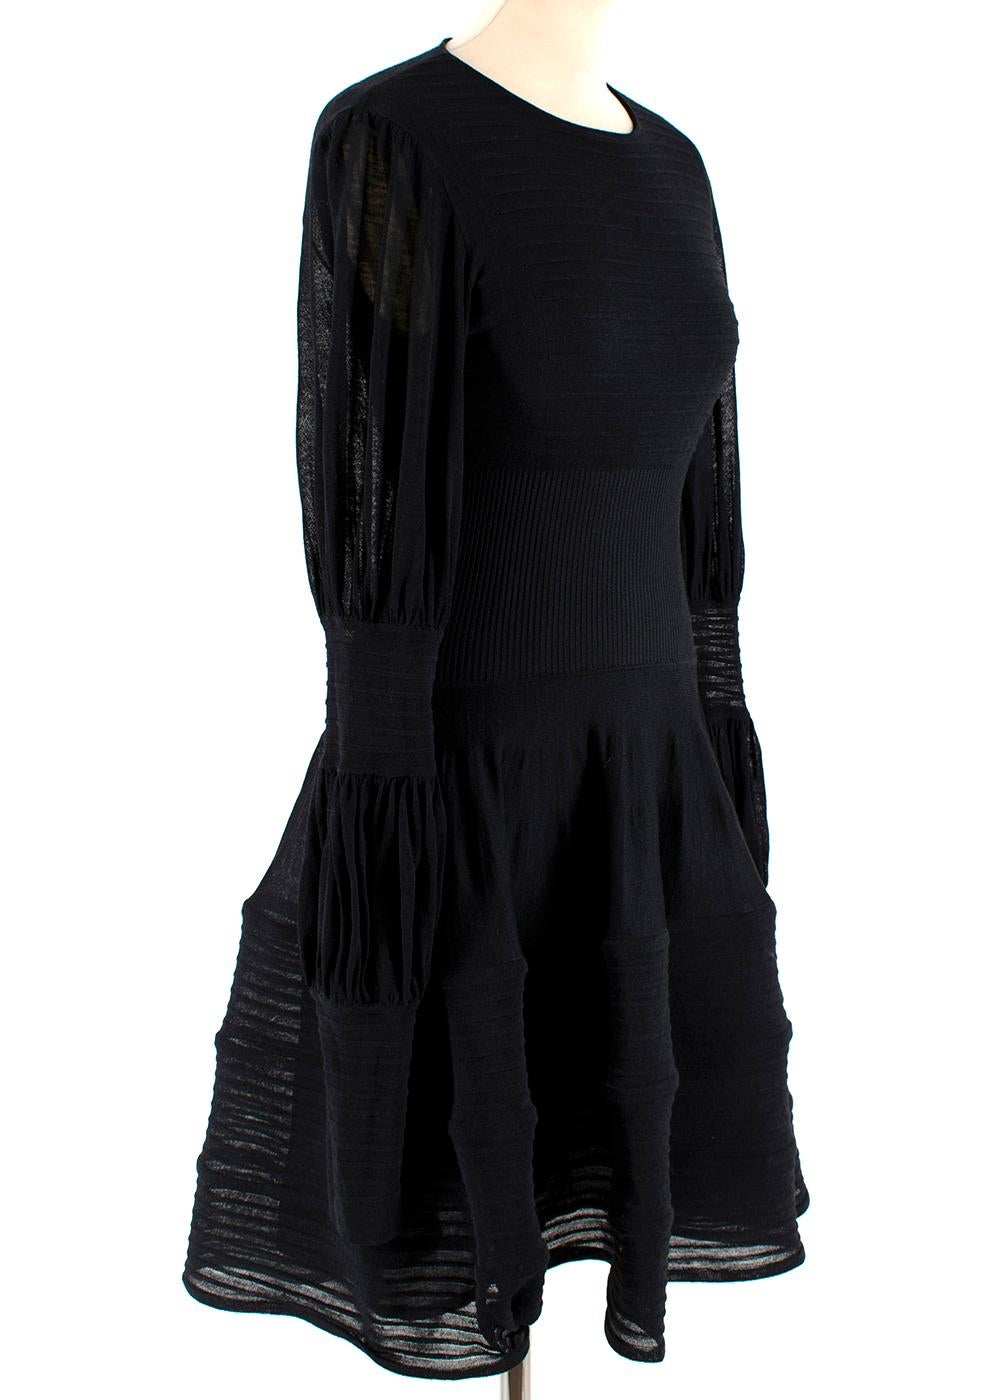 Alexander McQueen Black Ribbed Silk Dress - Size Medium In Excellent Condition For Sale In London, GB